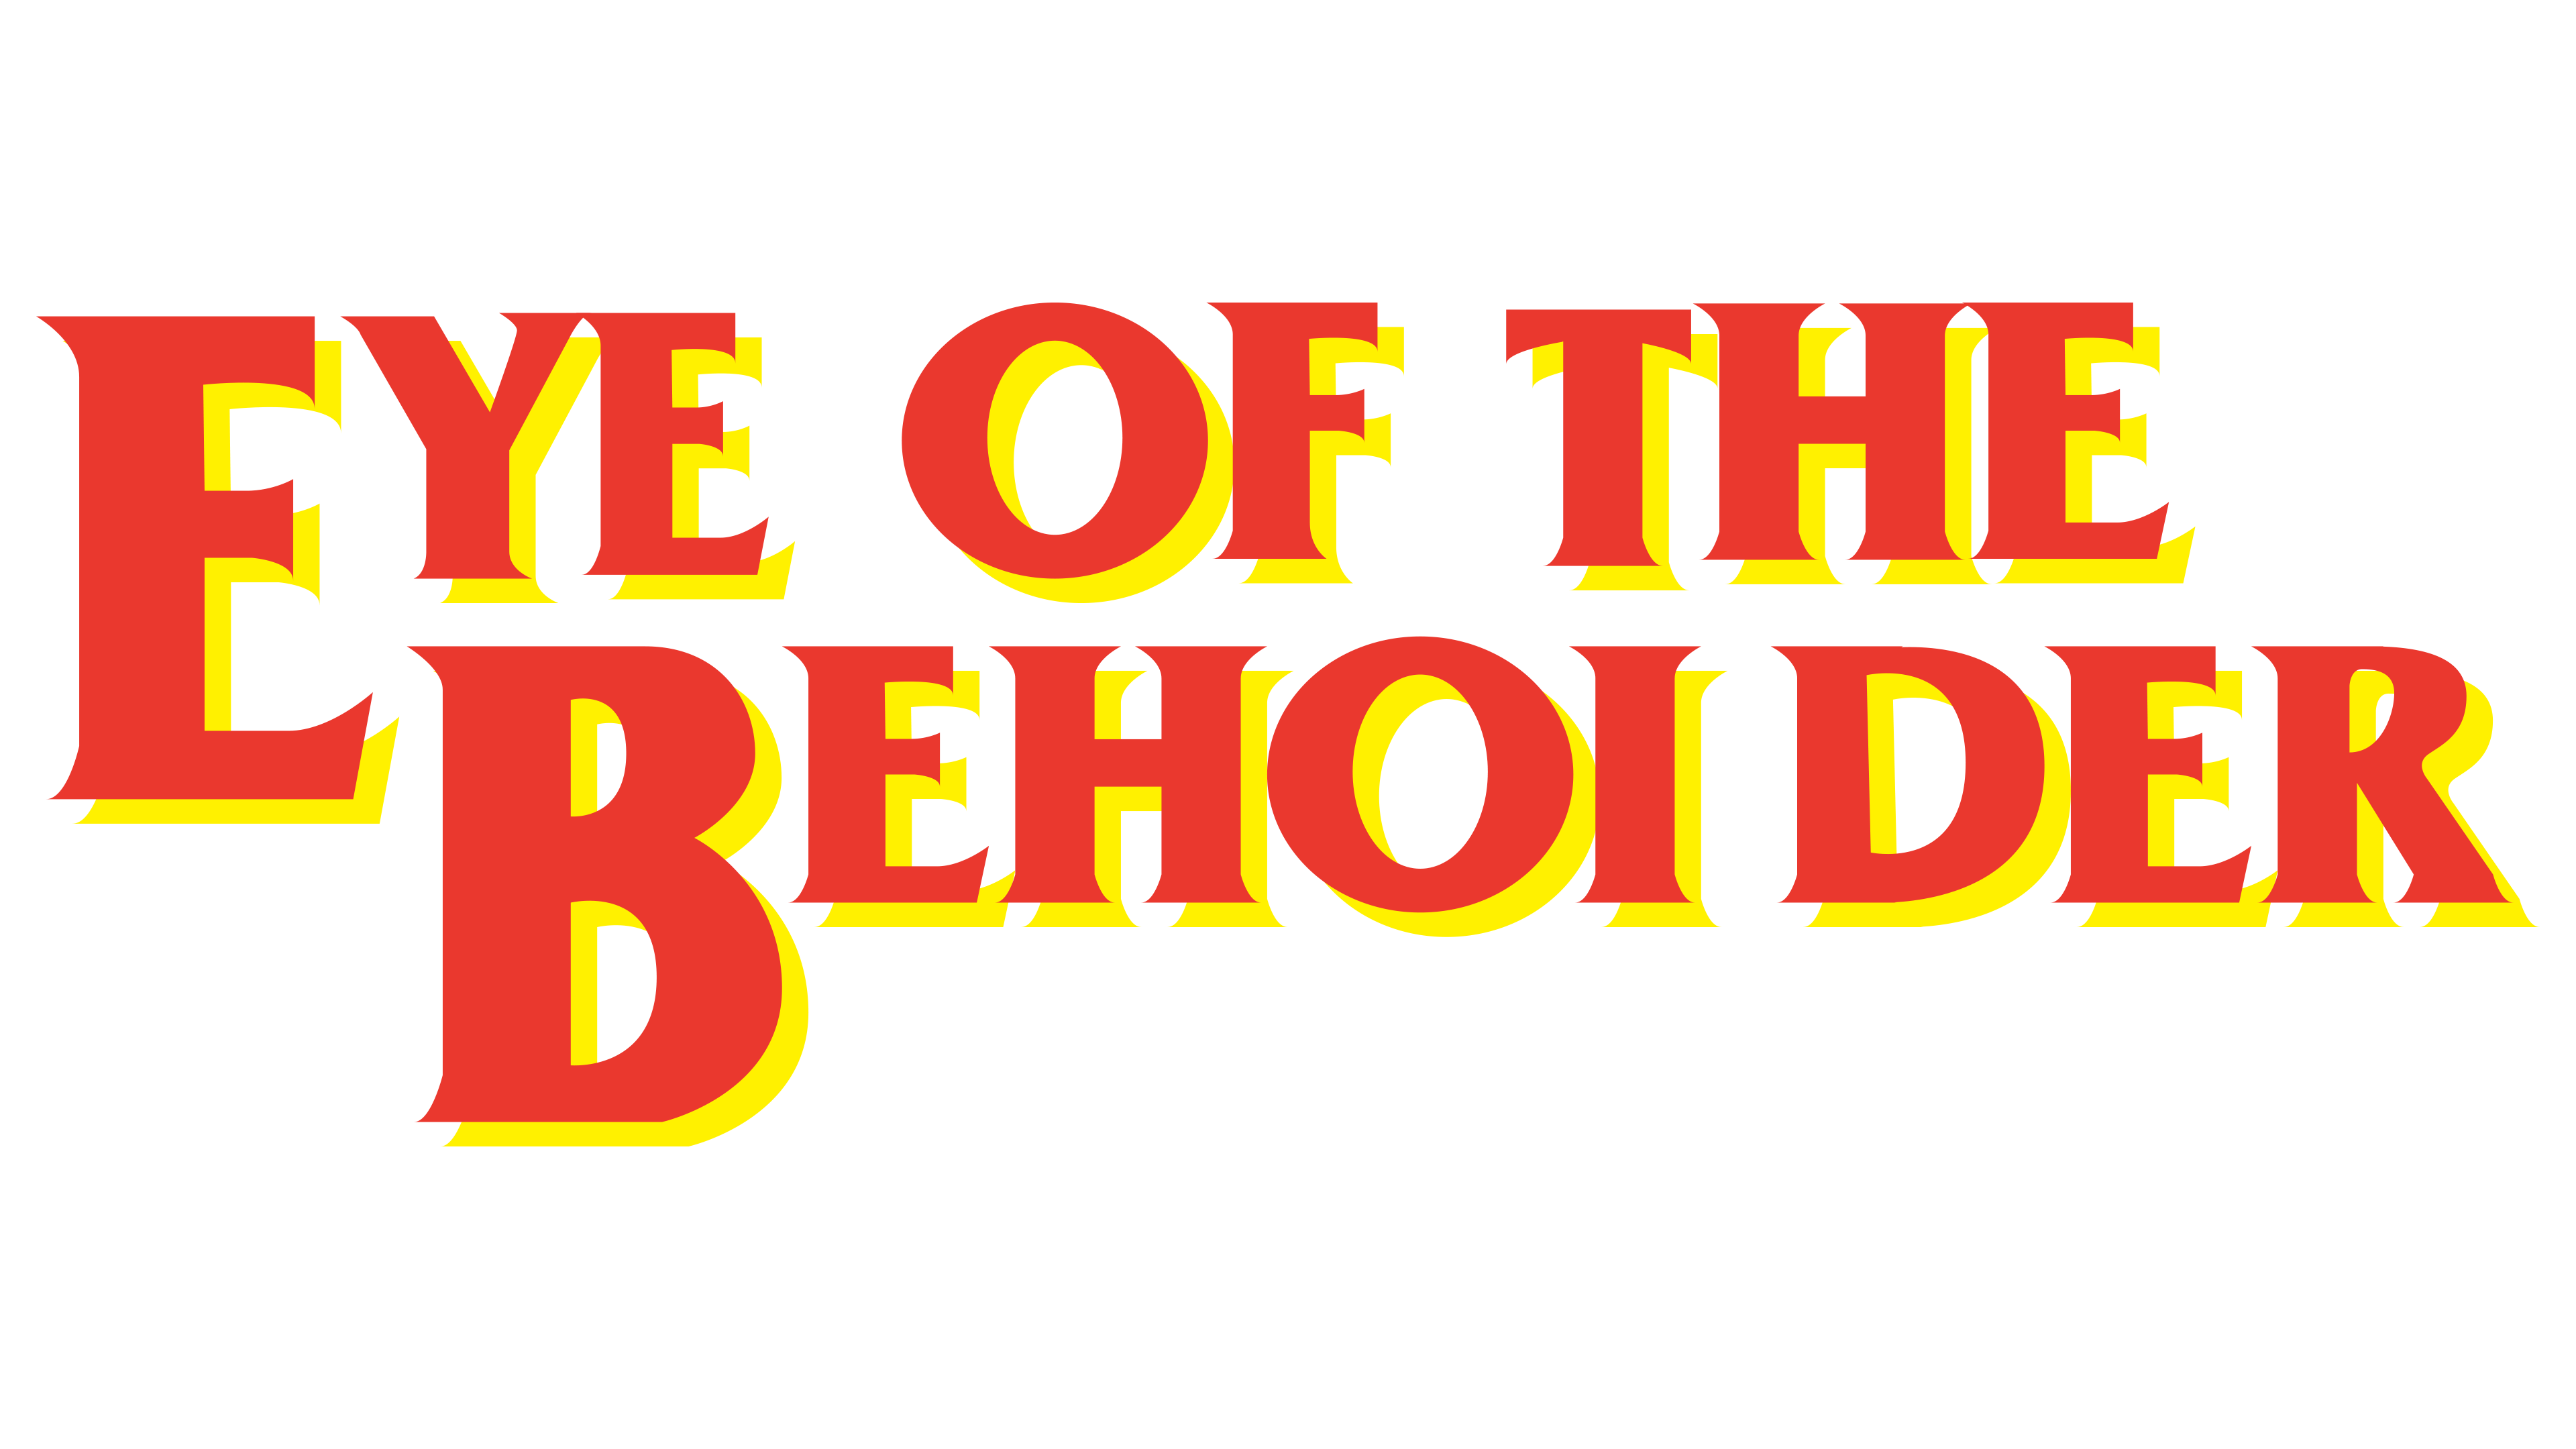 eye of the beholder 3 copy protection codes